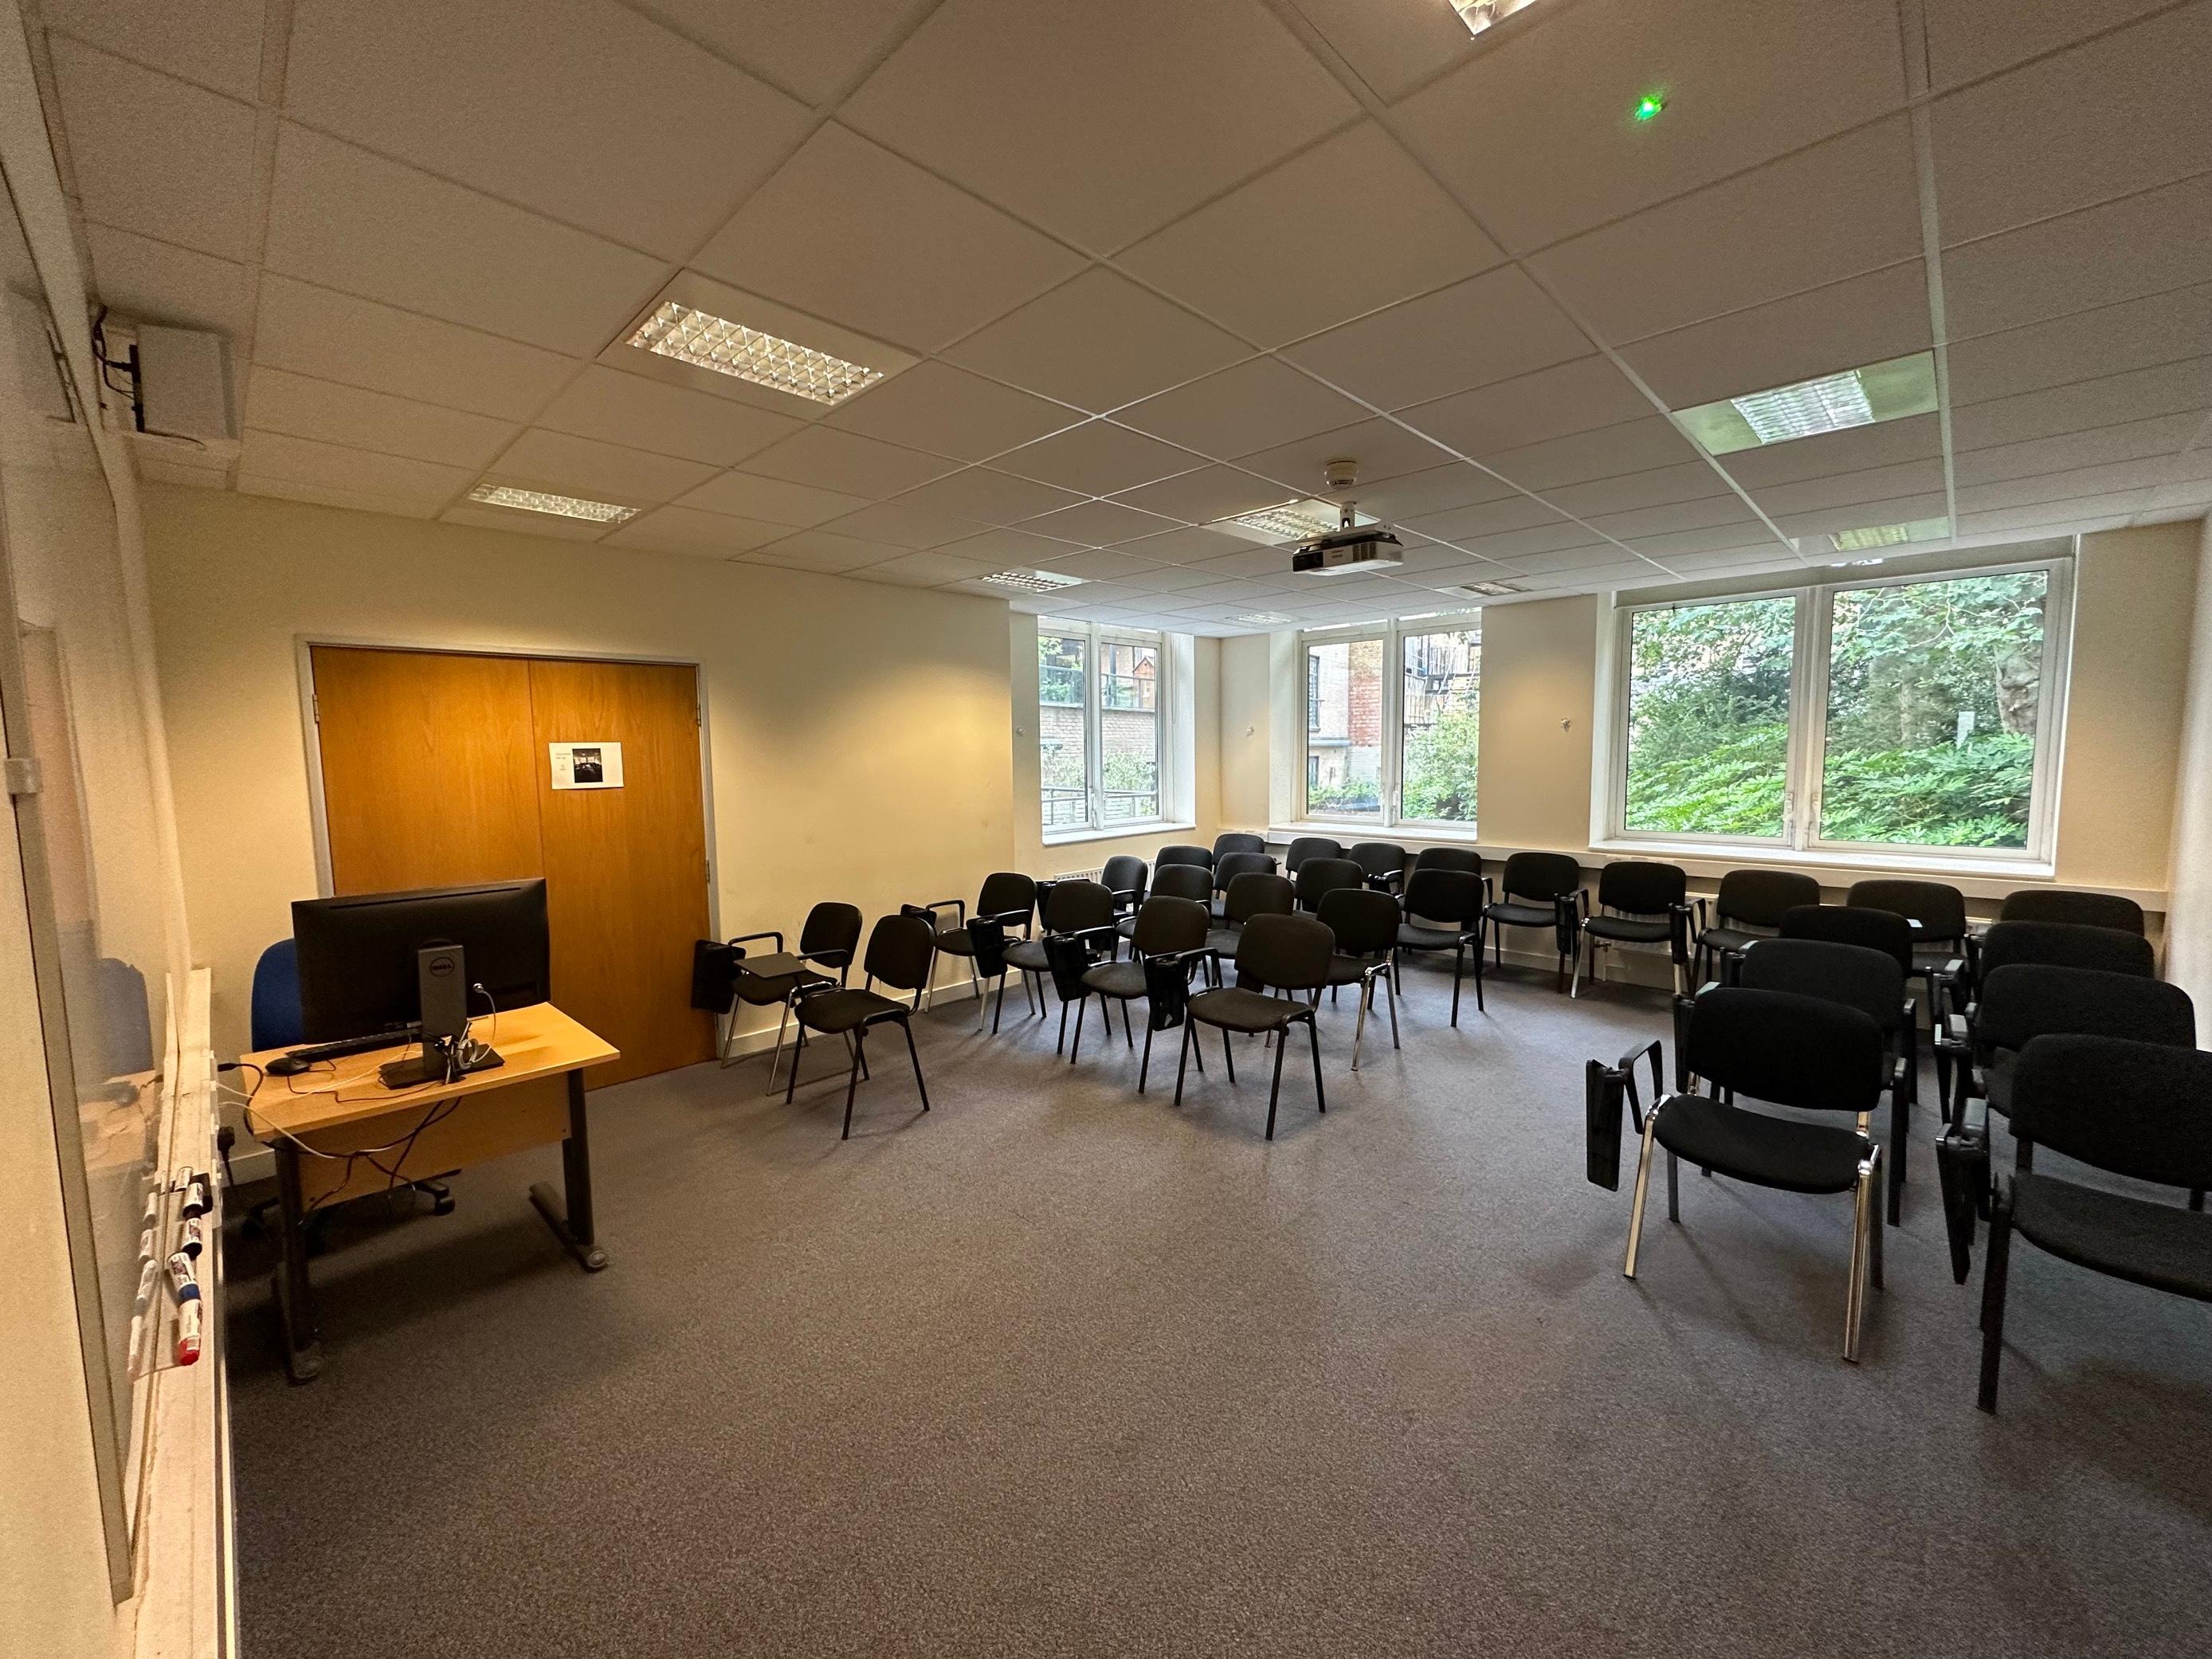 Classroom Up To 30, OMNES Education London School photo #1